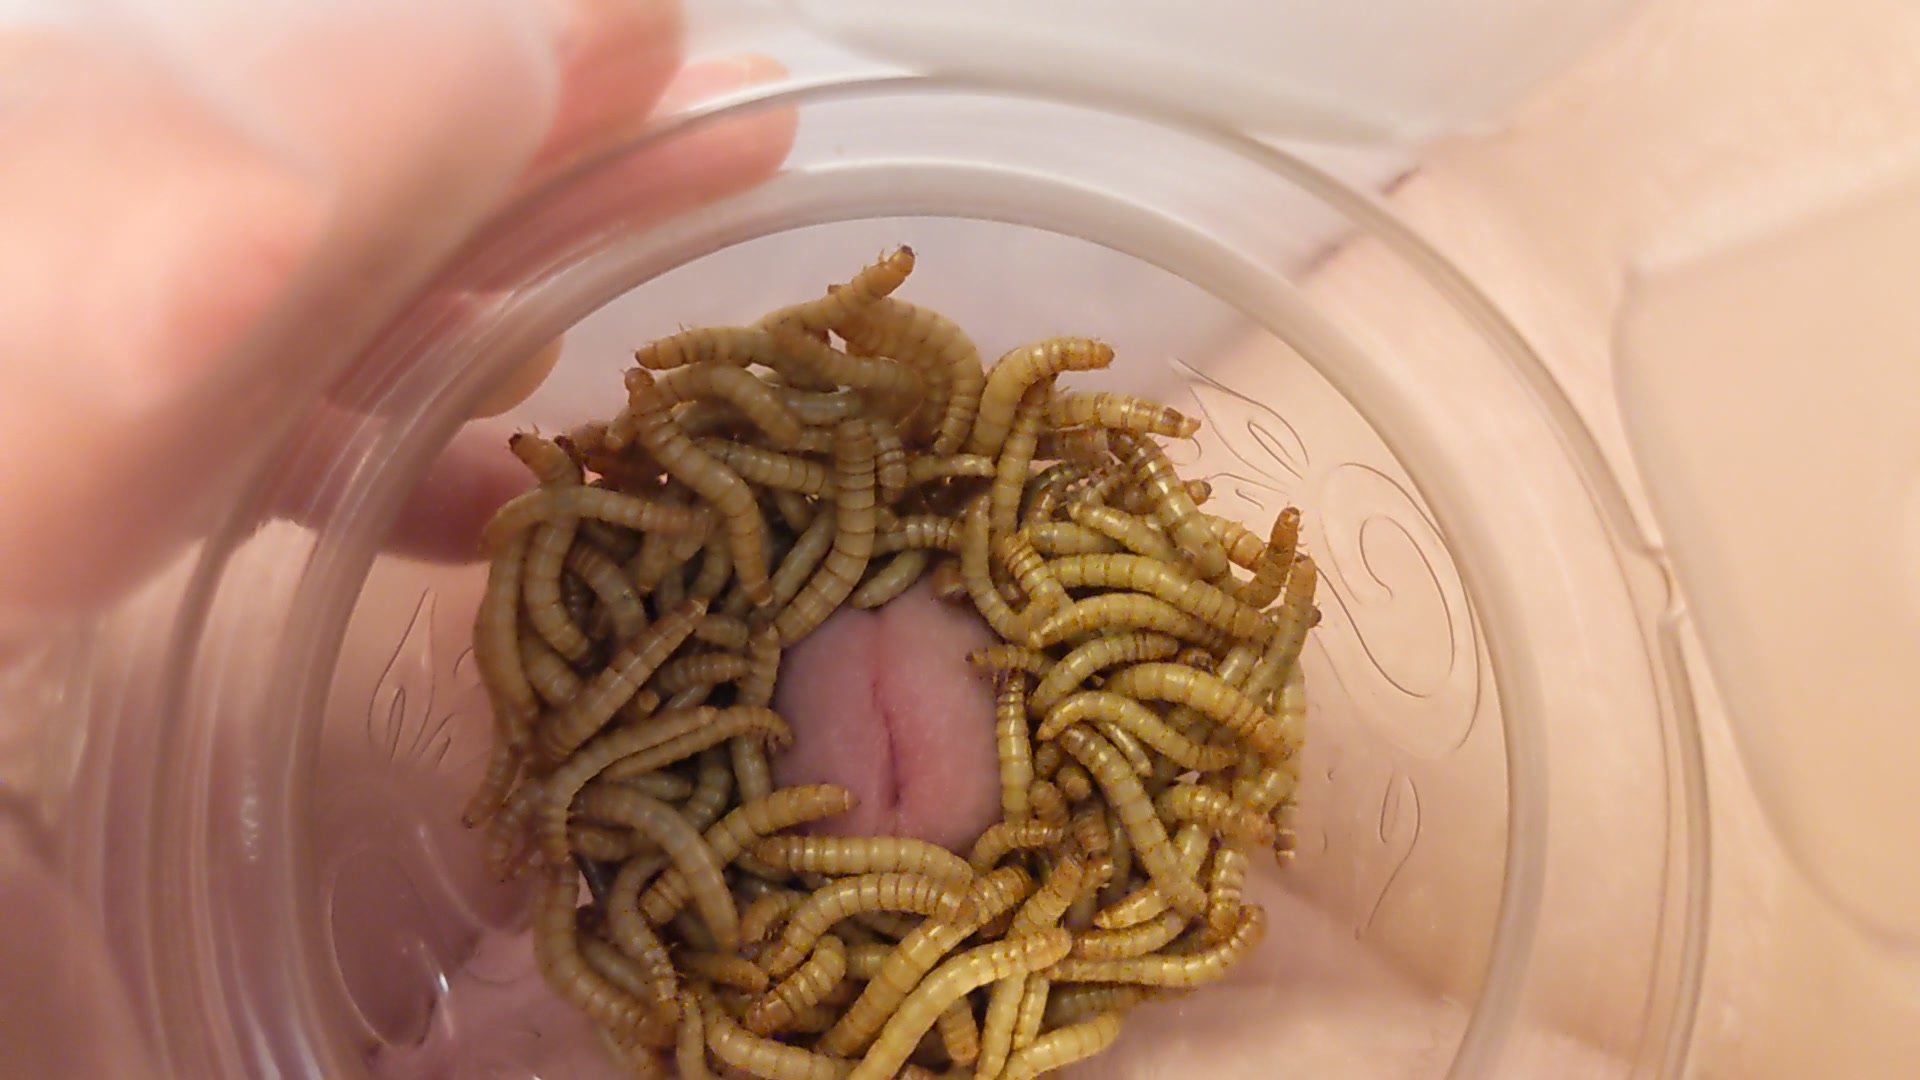 Mealworms cock ...